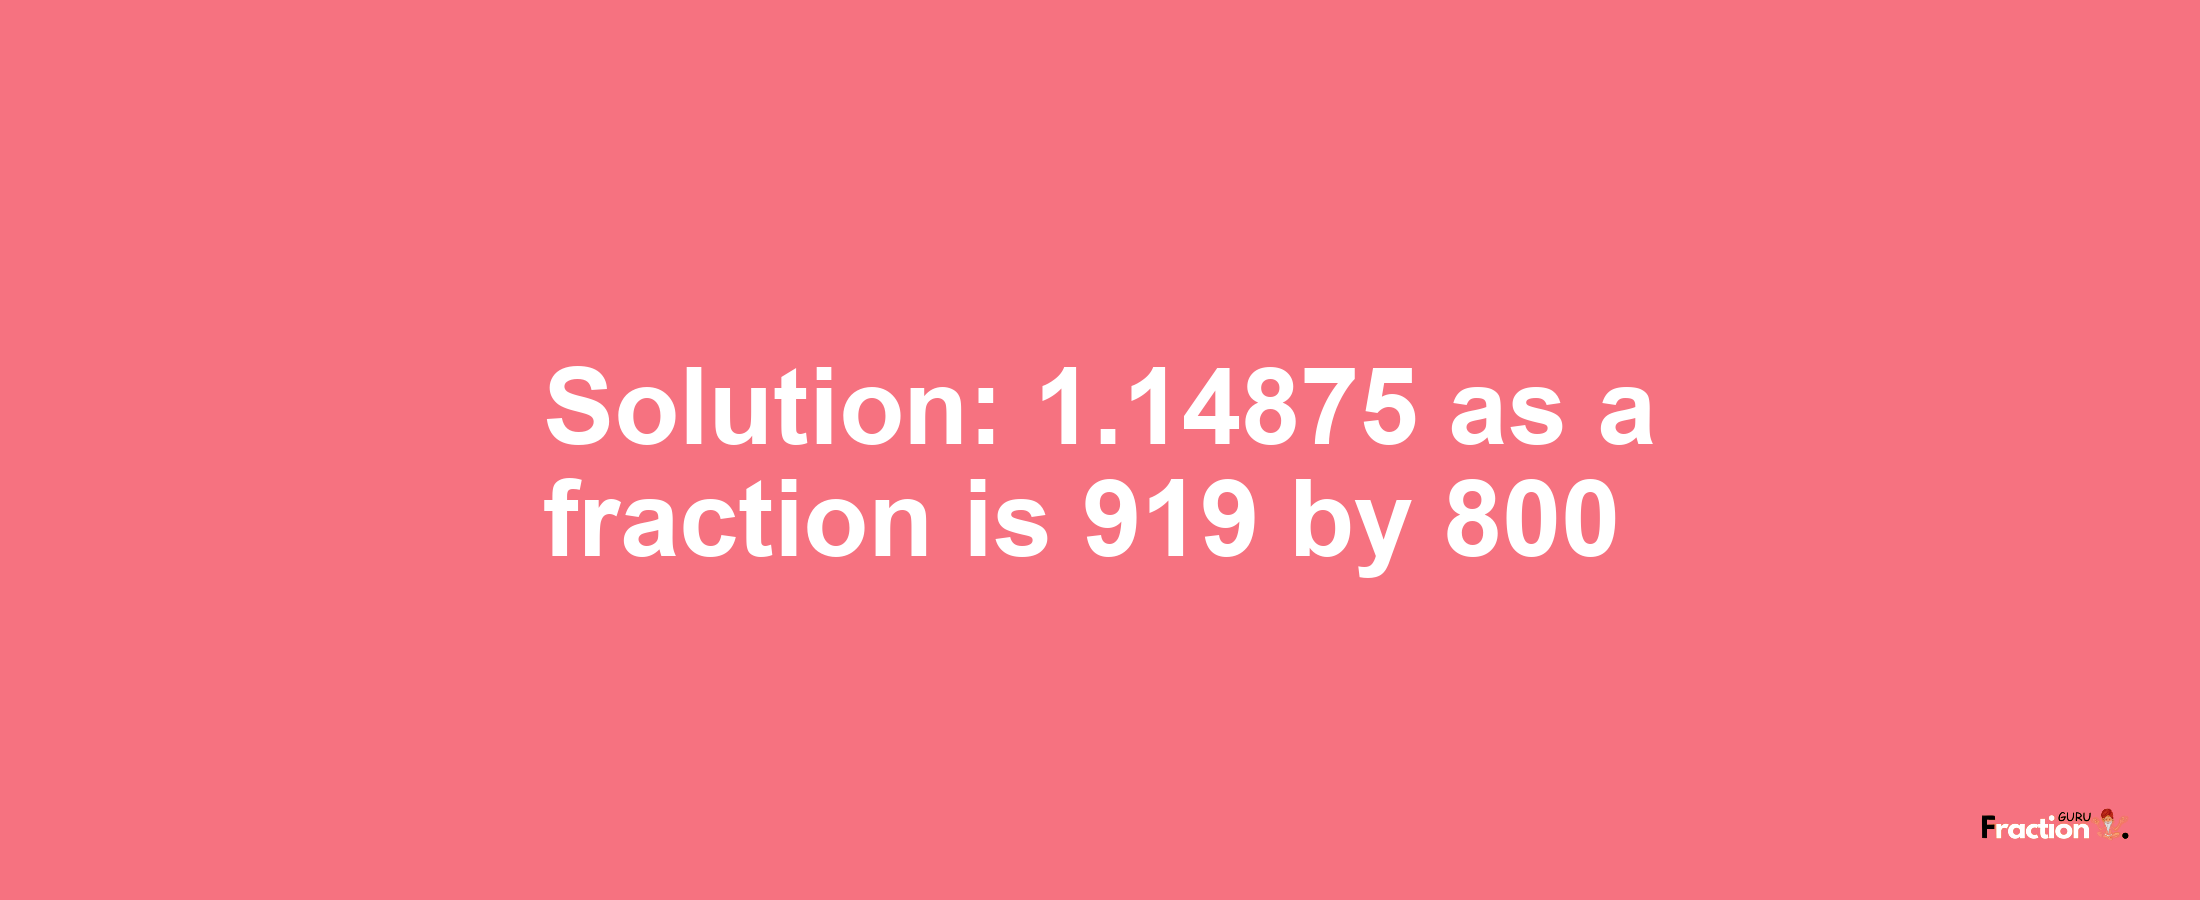 Solution:1.14875 as a fraction is 919/800